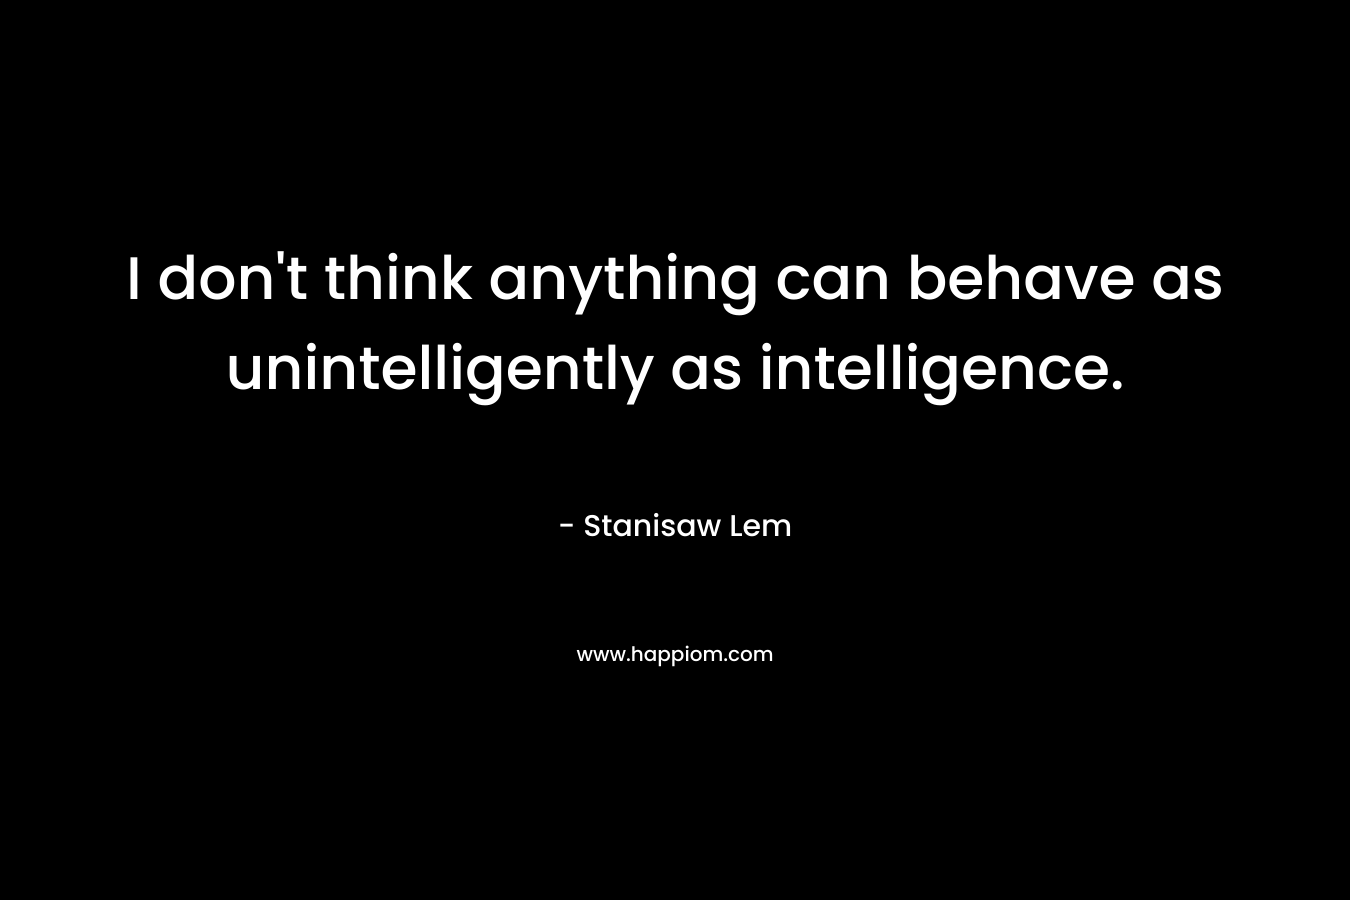 I don’t think anything can behave as unintelligently as intelligence. – Stanisaw Lem